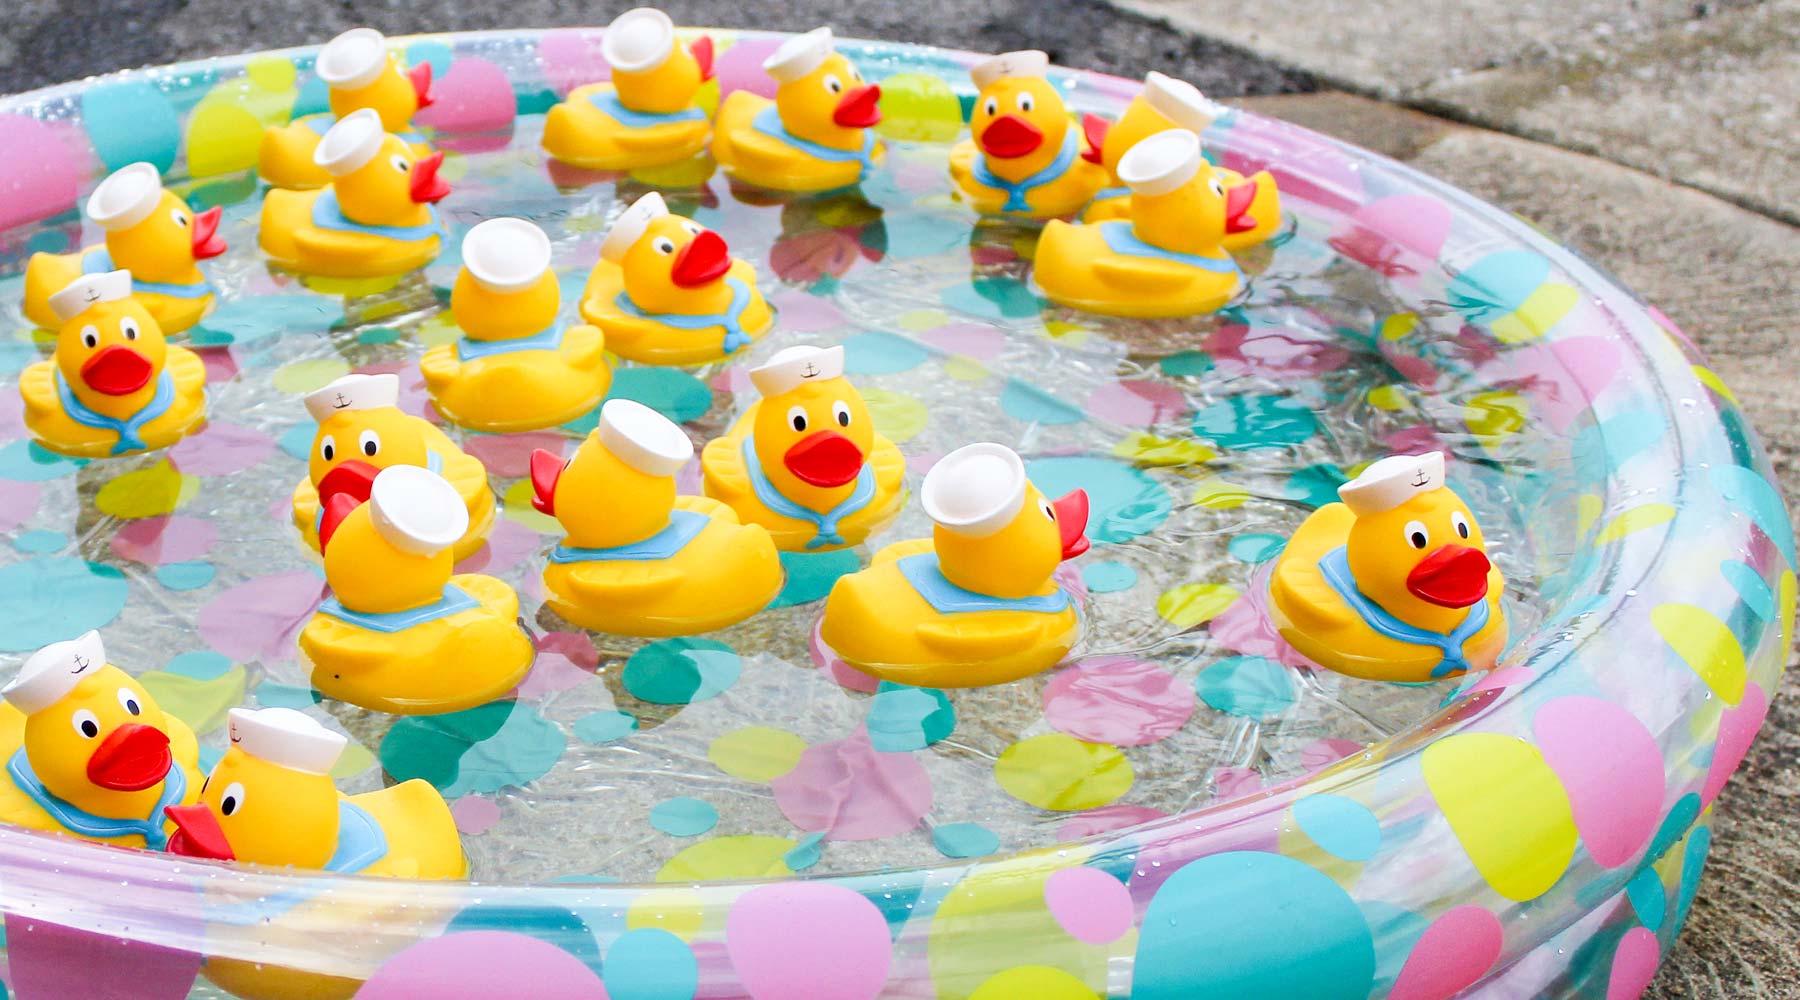 FREE Game Ideas - Carnival Party Games - Matching Ducks - Carnival